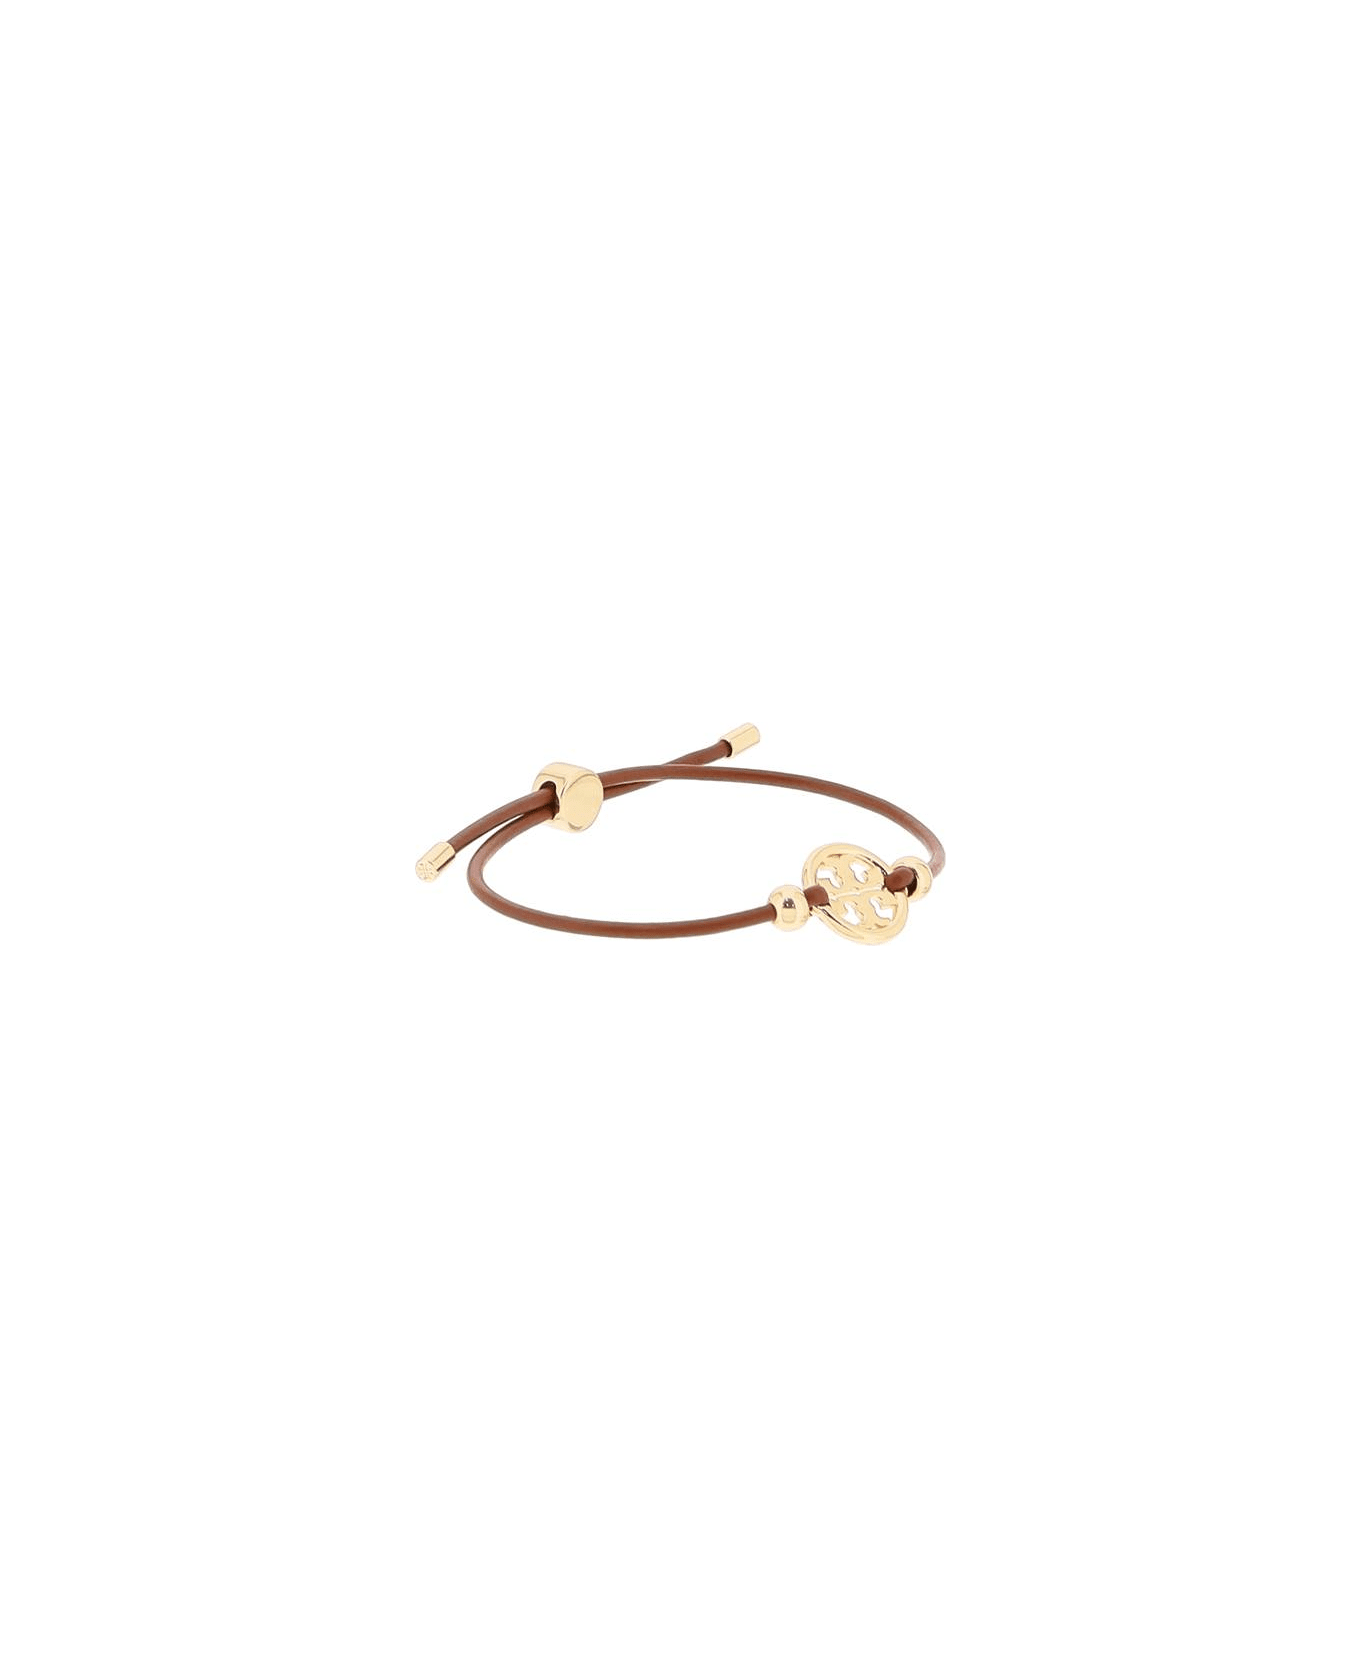 Tory Burch Miller Slider Bracelet - TORY GOLD CUOIO (Brown) ブレスレット